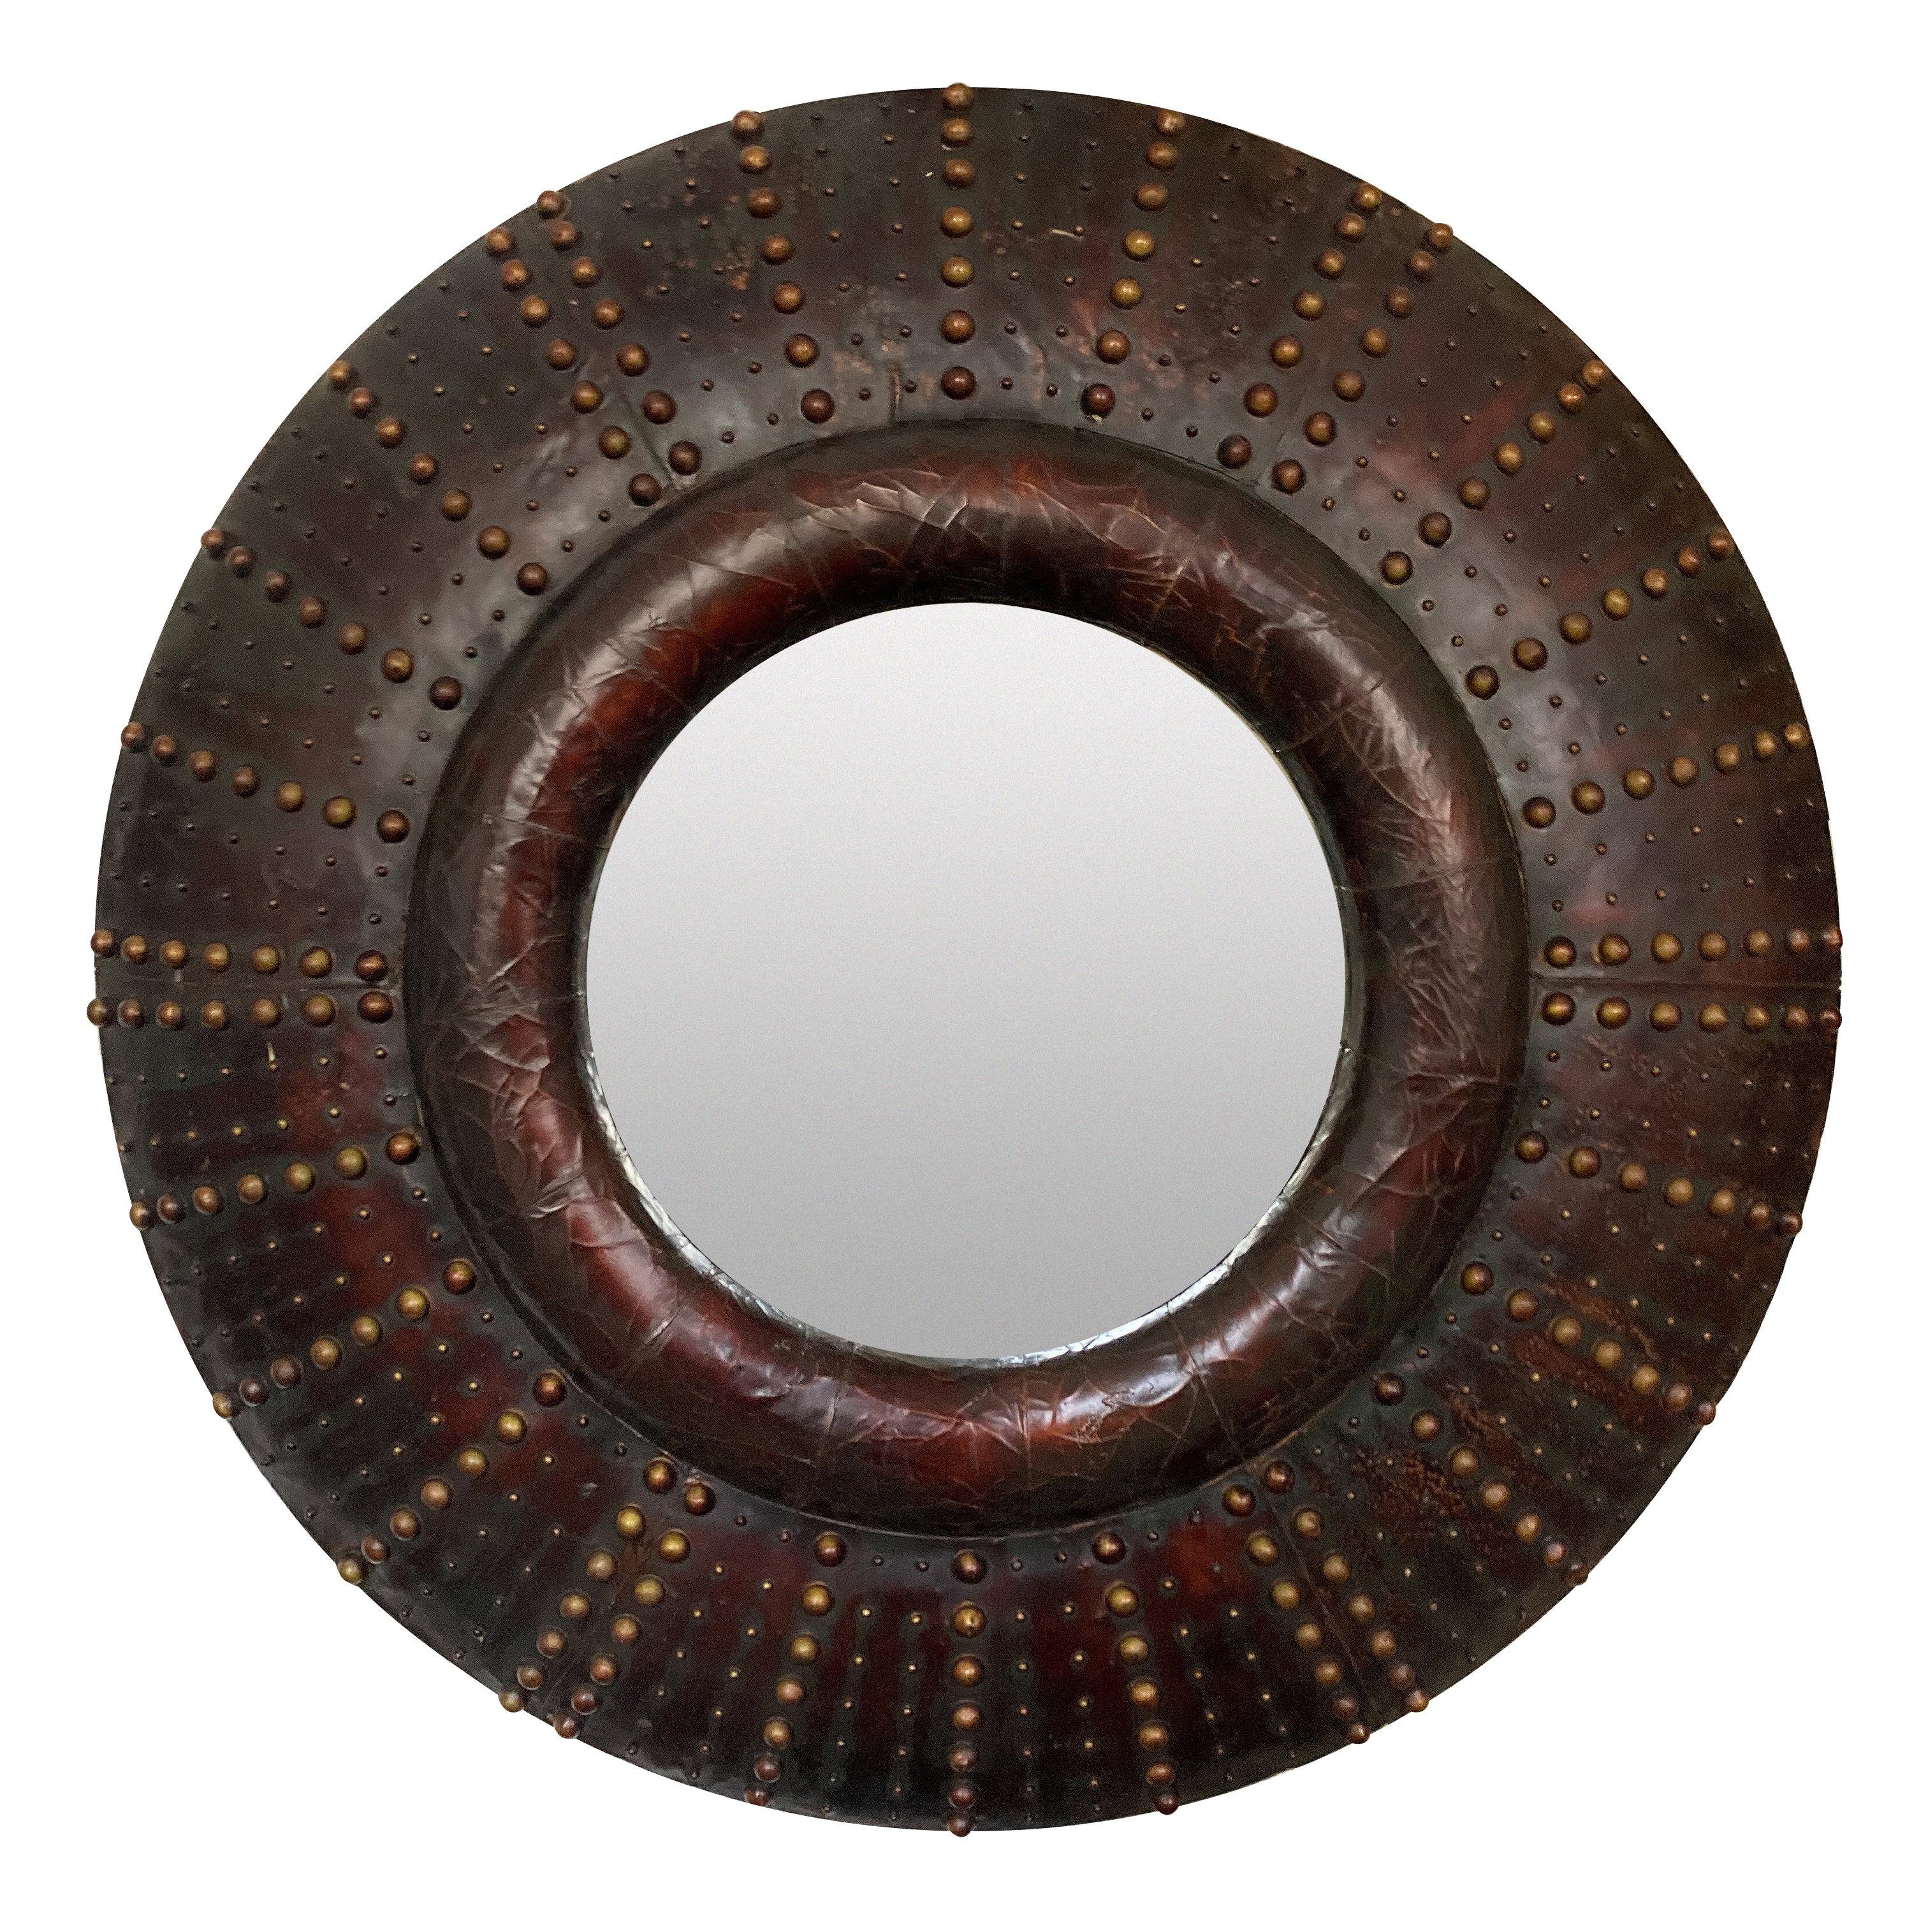 A large pair of English, circular leather-clad cushion mirrors, with an antique gold beaded decoration.